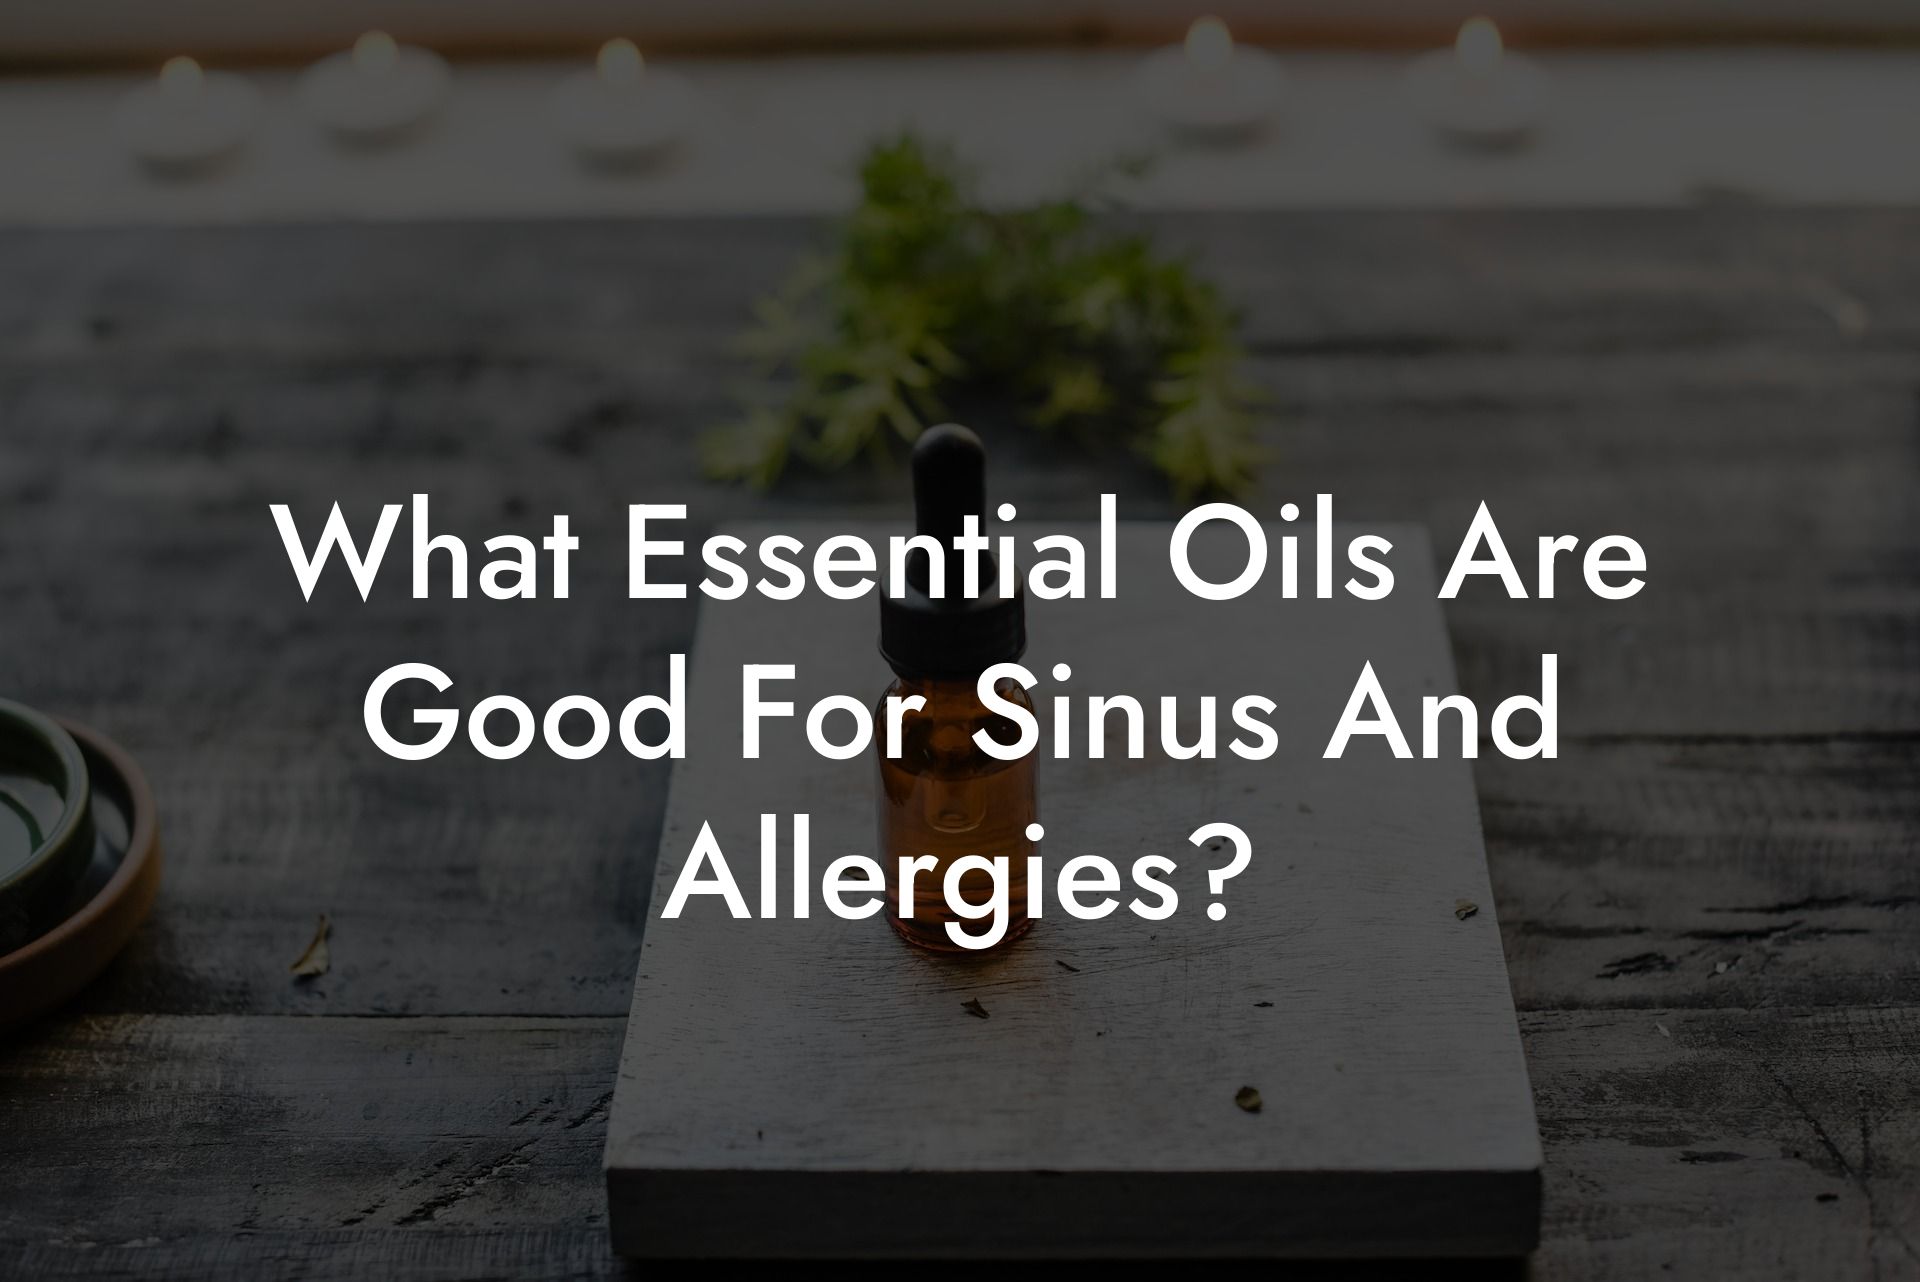 What Essential Oils Are Good For Sinus And Allergies